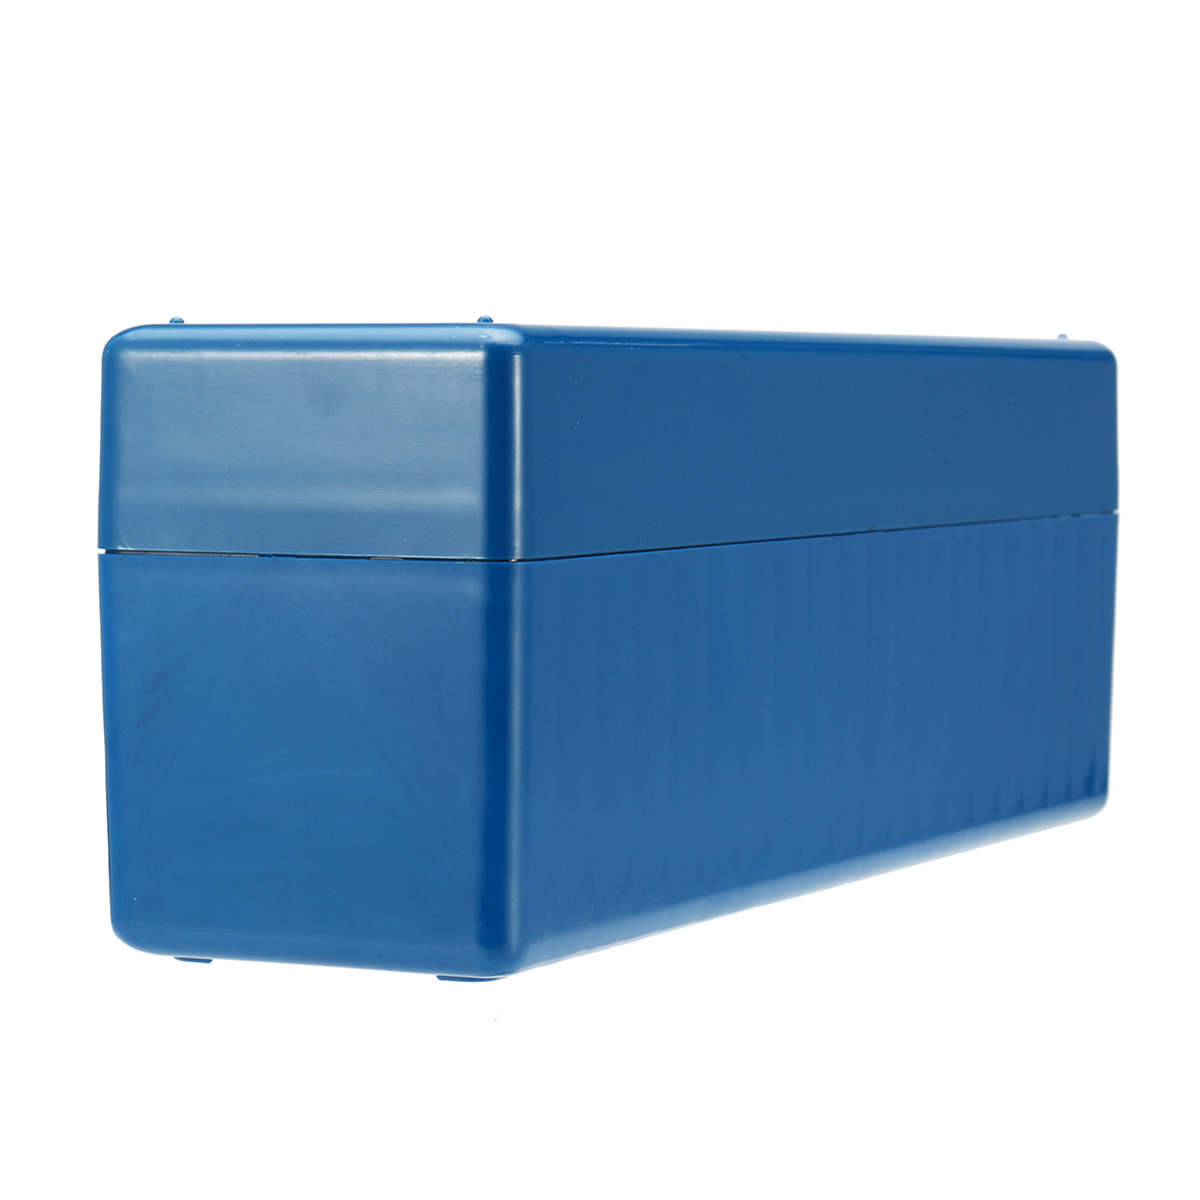 25x9x7cm-Blue-Storage-Tool-Box-Case-Holds-20-Individual-Certified-PCGS-NGC-ICG-Coin-Holders-1425243-4